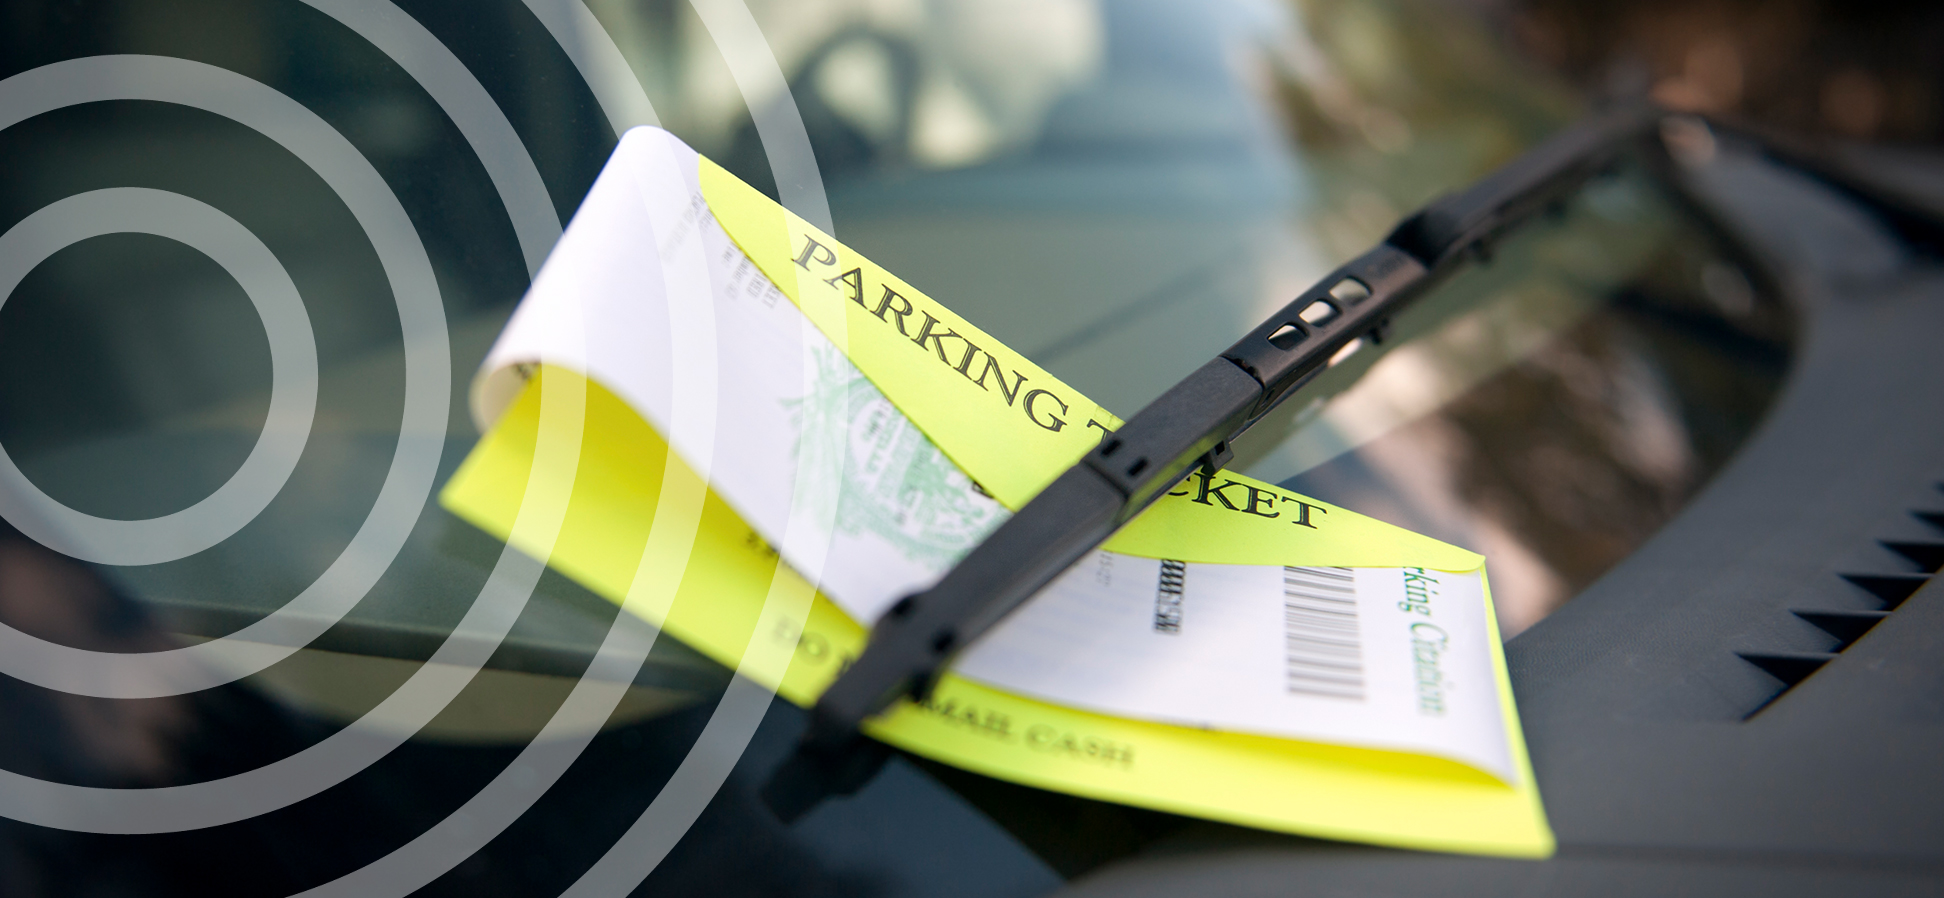 The Best Tricks to Avoid Parking Tickets in the City